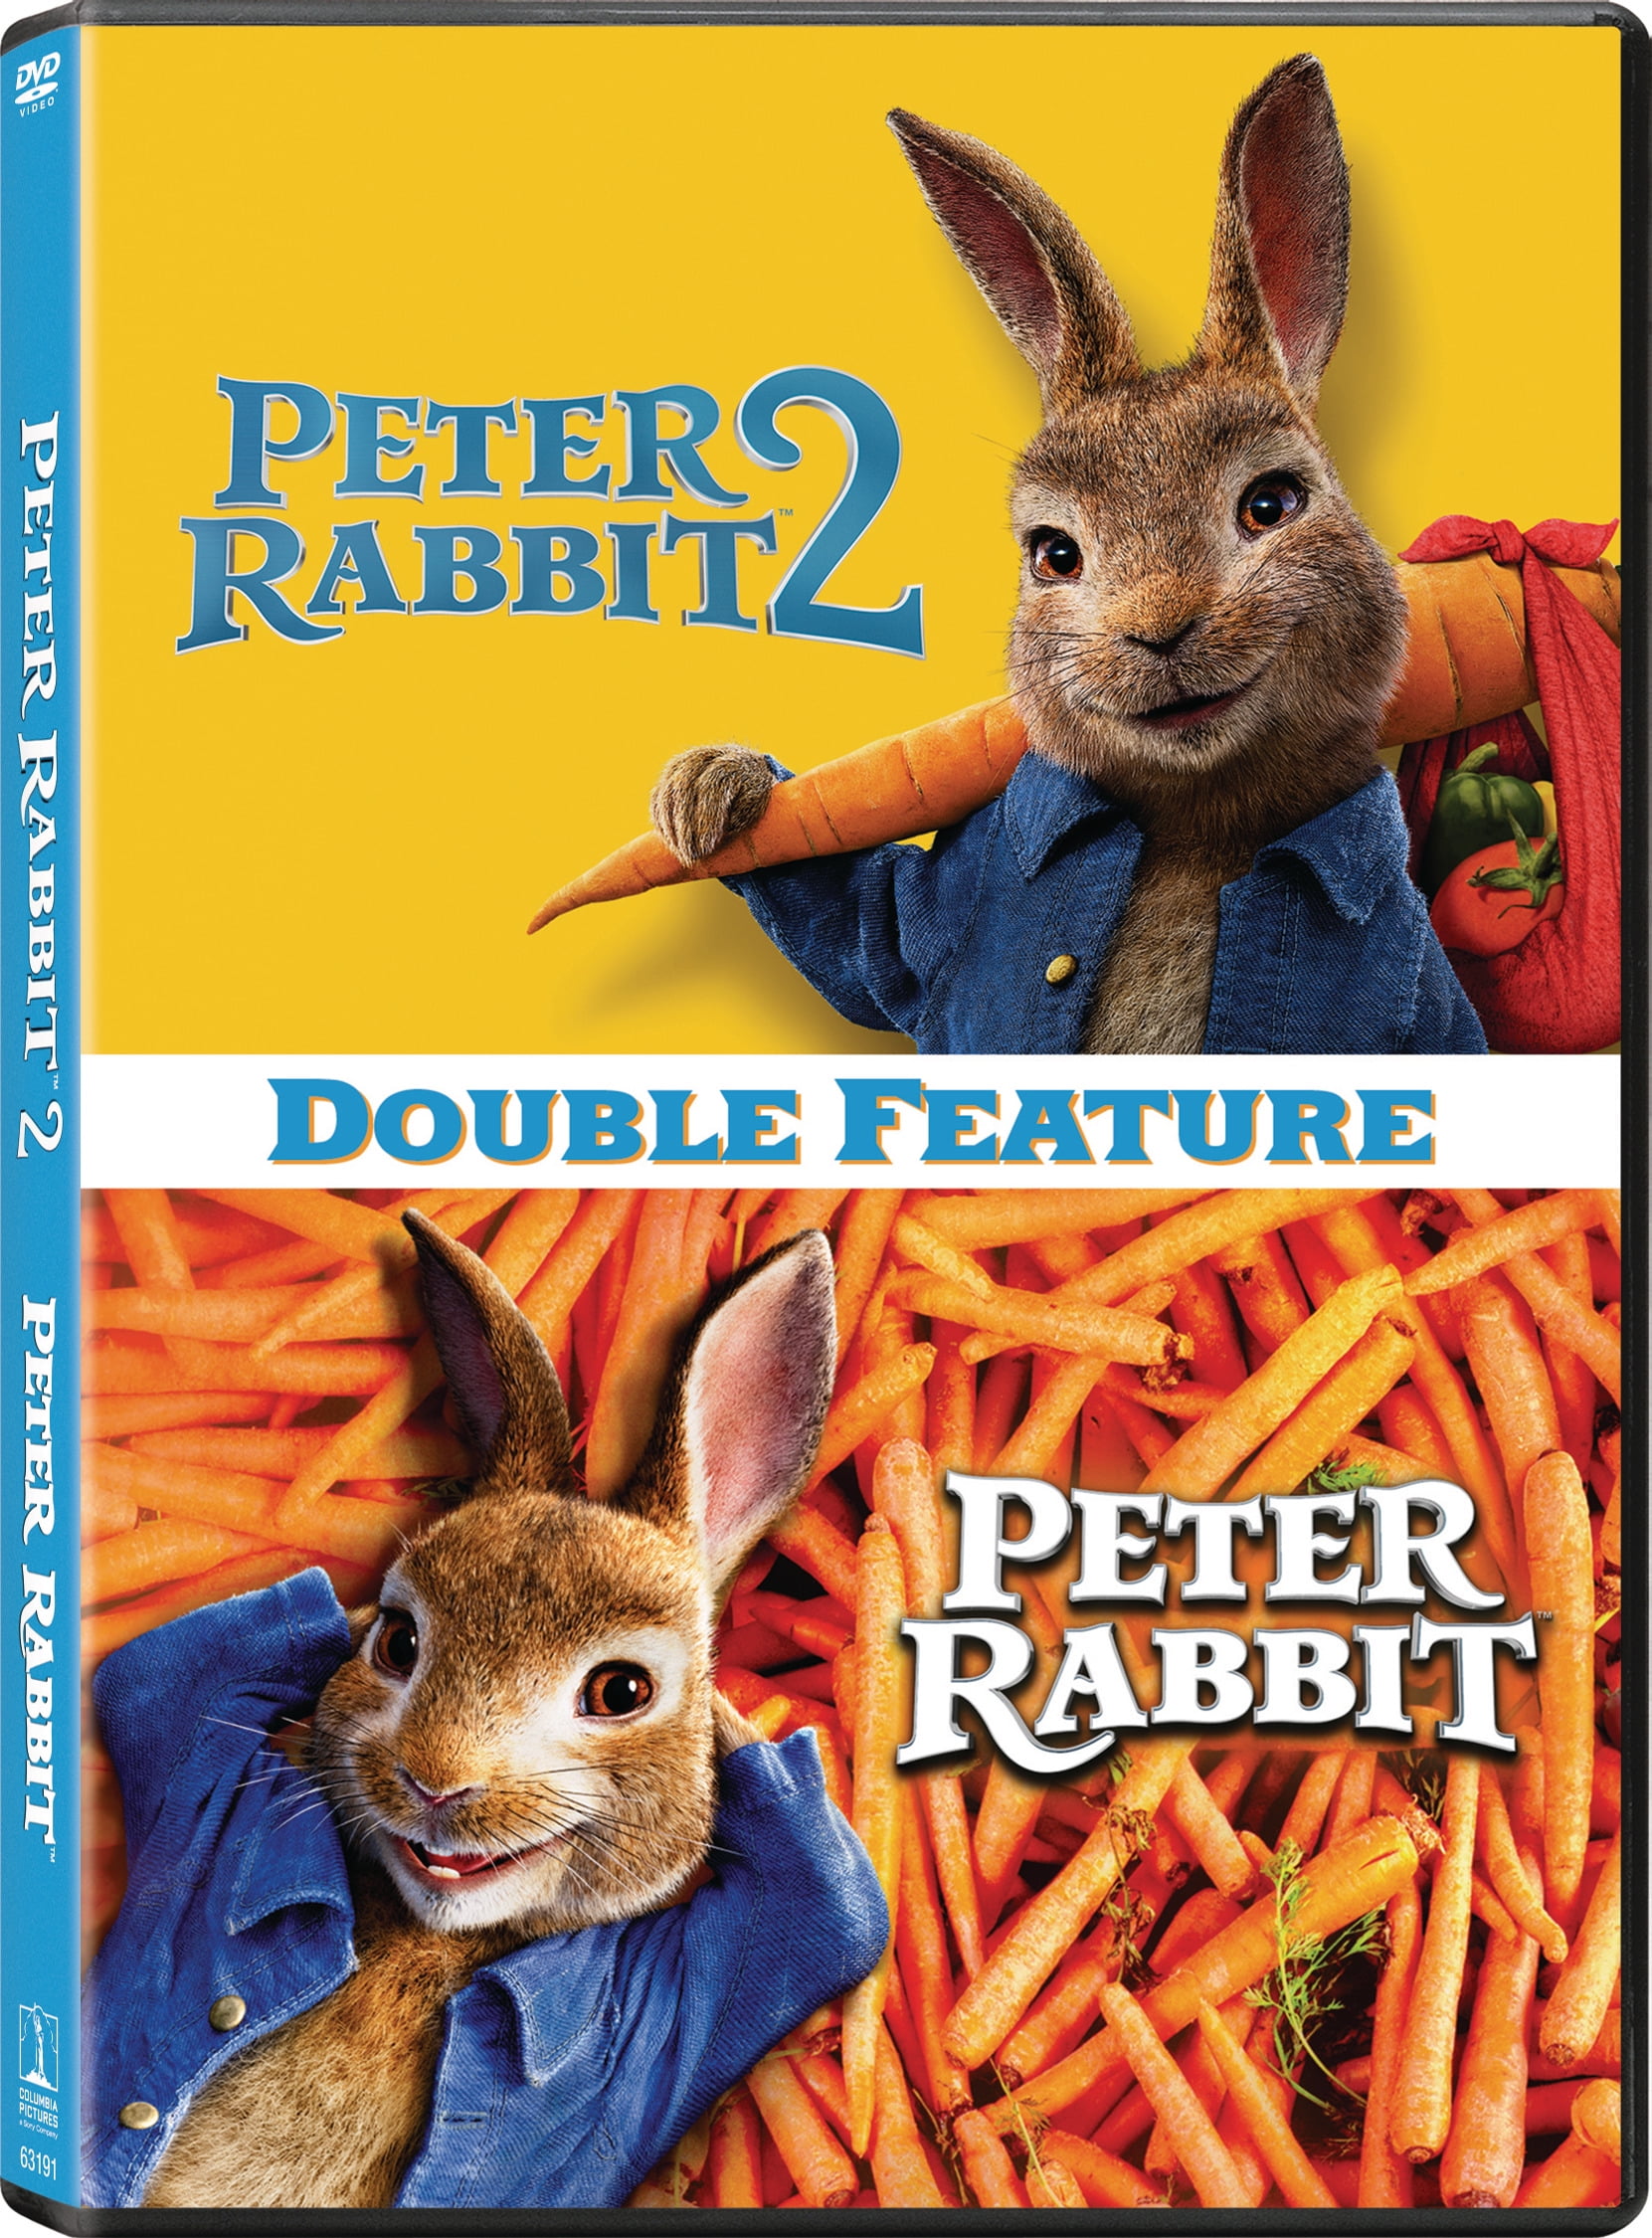 Peter Rabbit - movie: where to watch streaming online